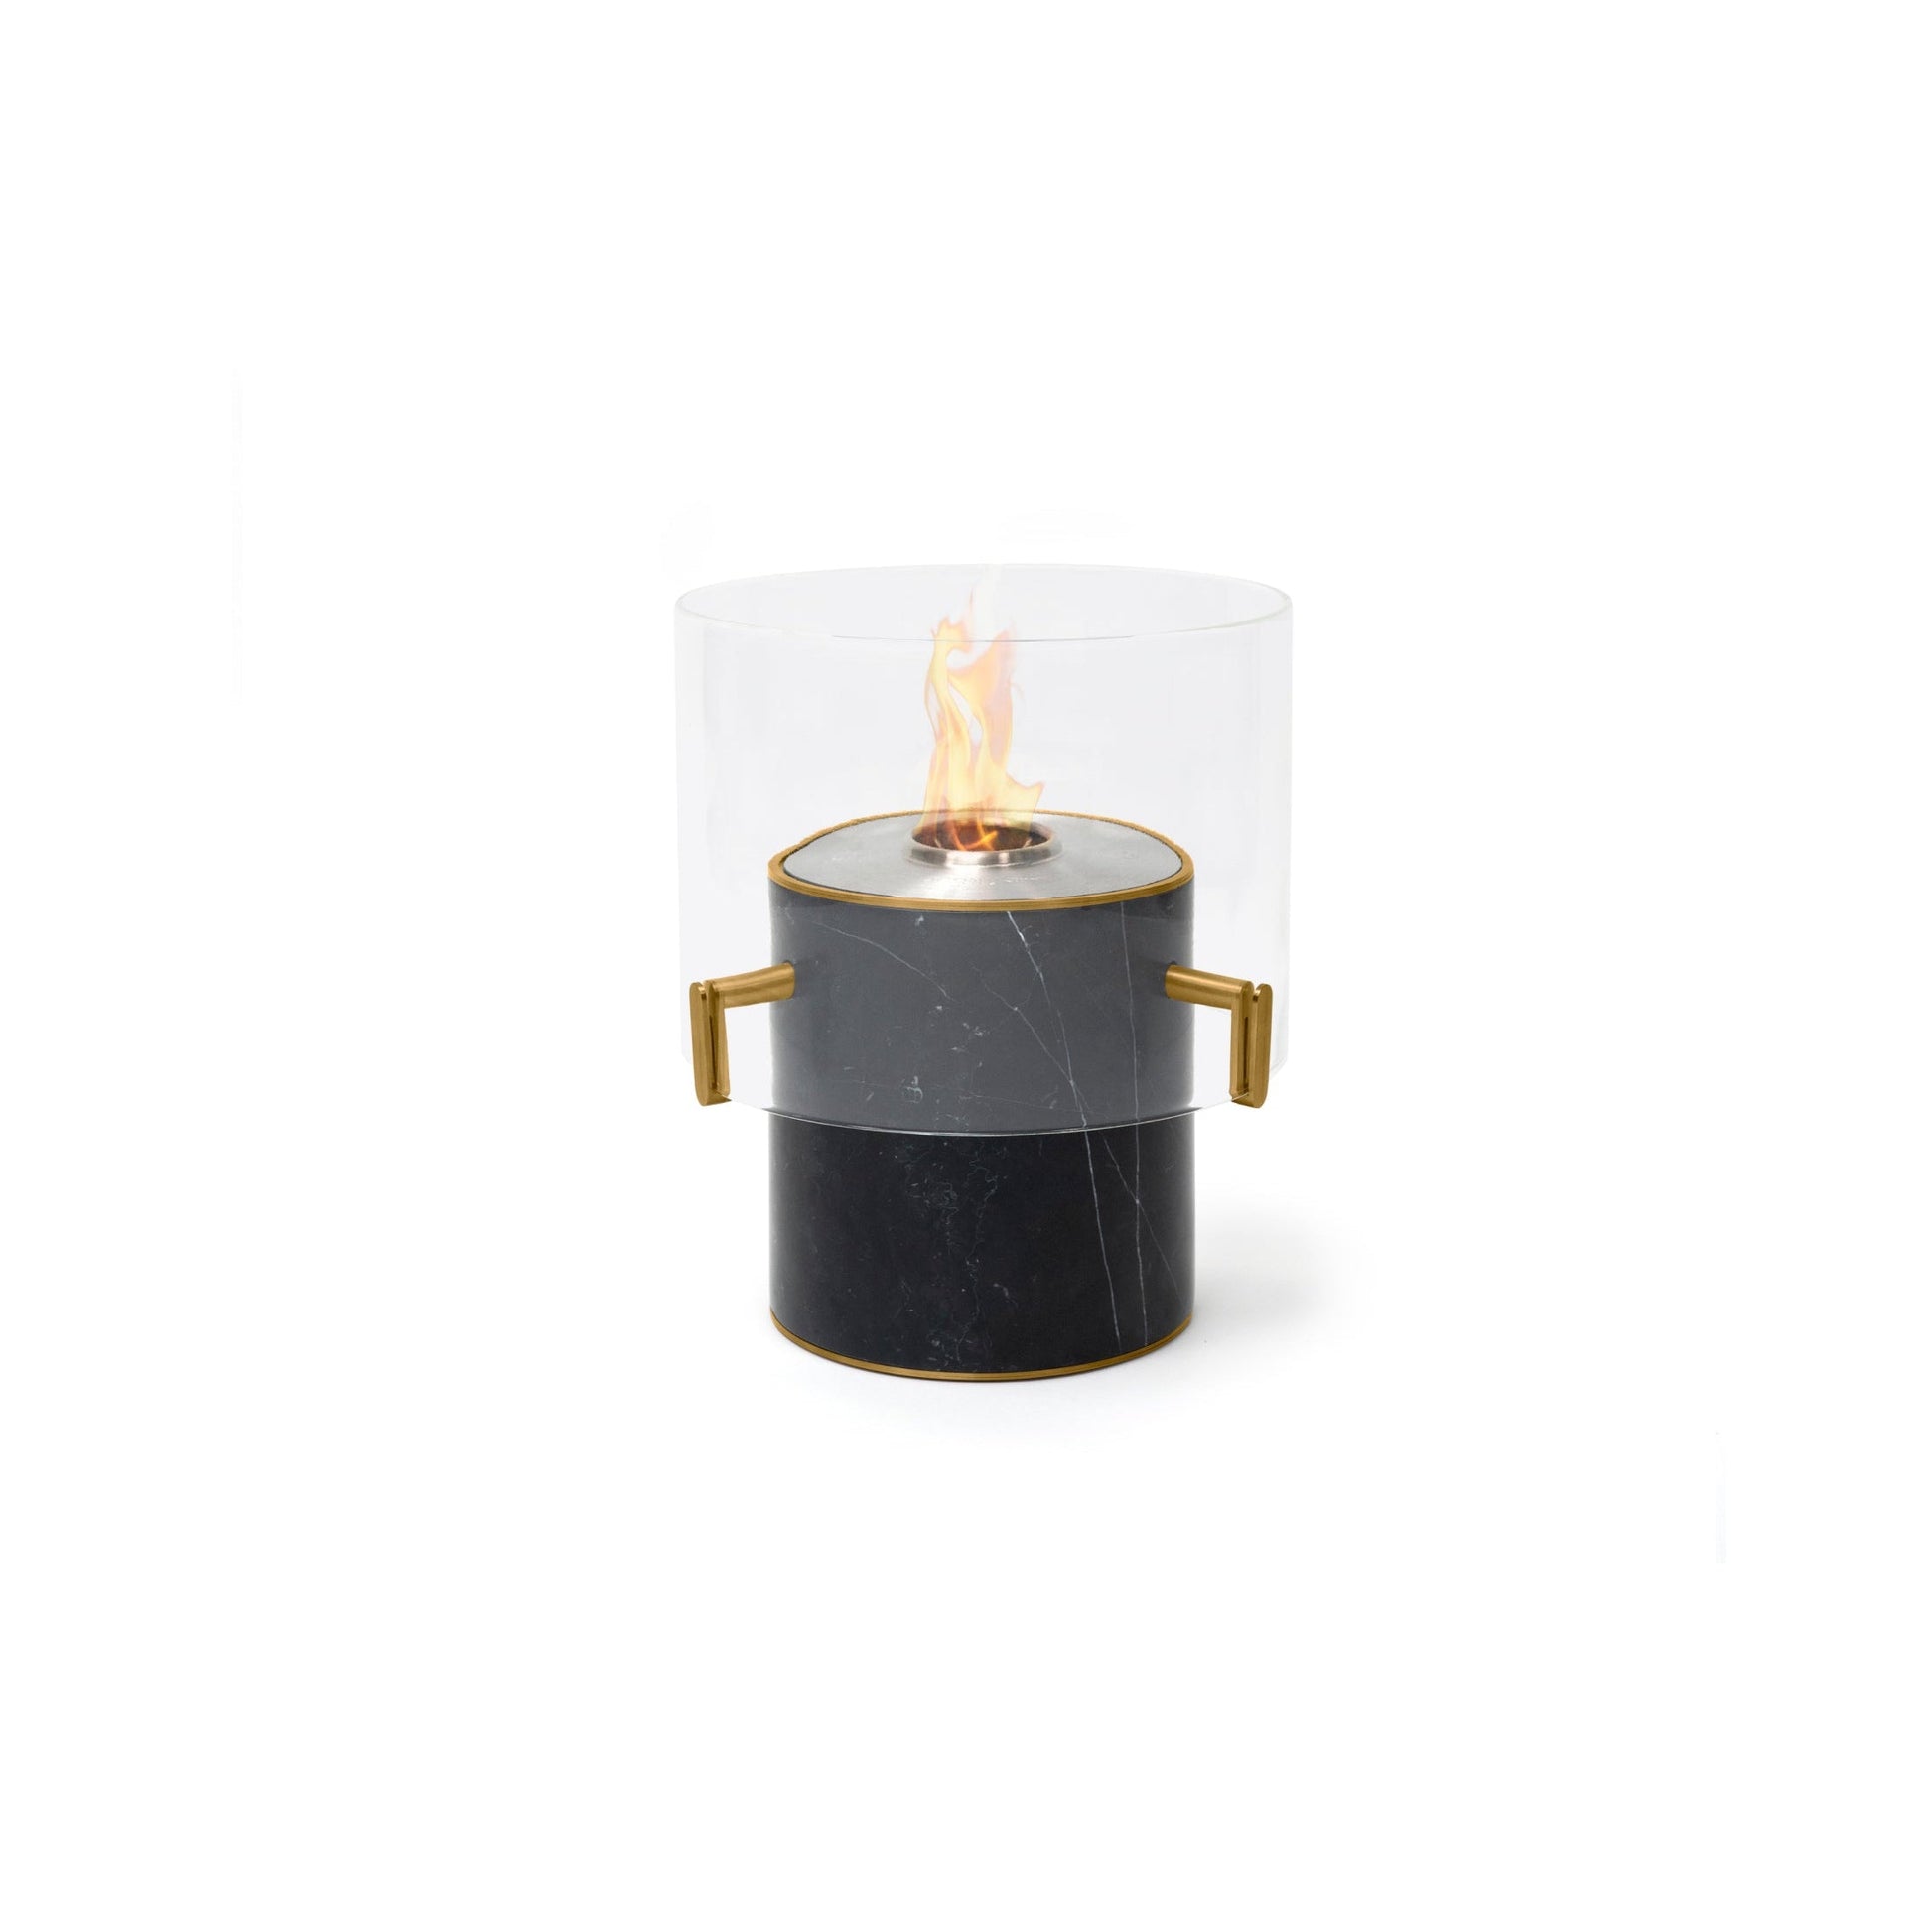 EcoSmart Fire PILLAR 3L 19" Marble Black Freestanding Designer Fireplace with Stainless Steel Burner by MAD Design Group